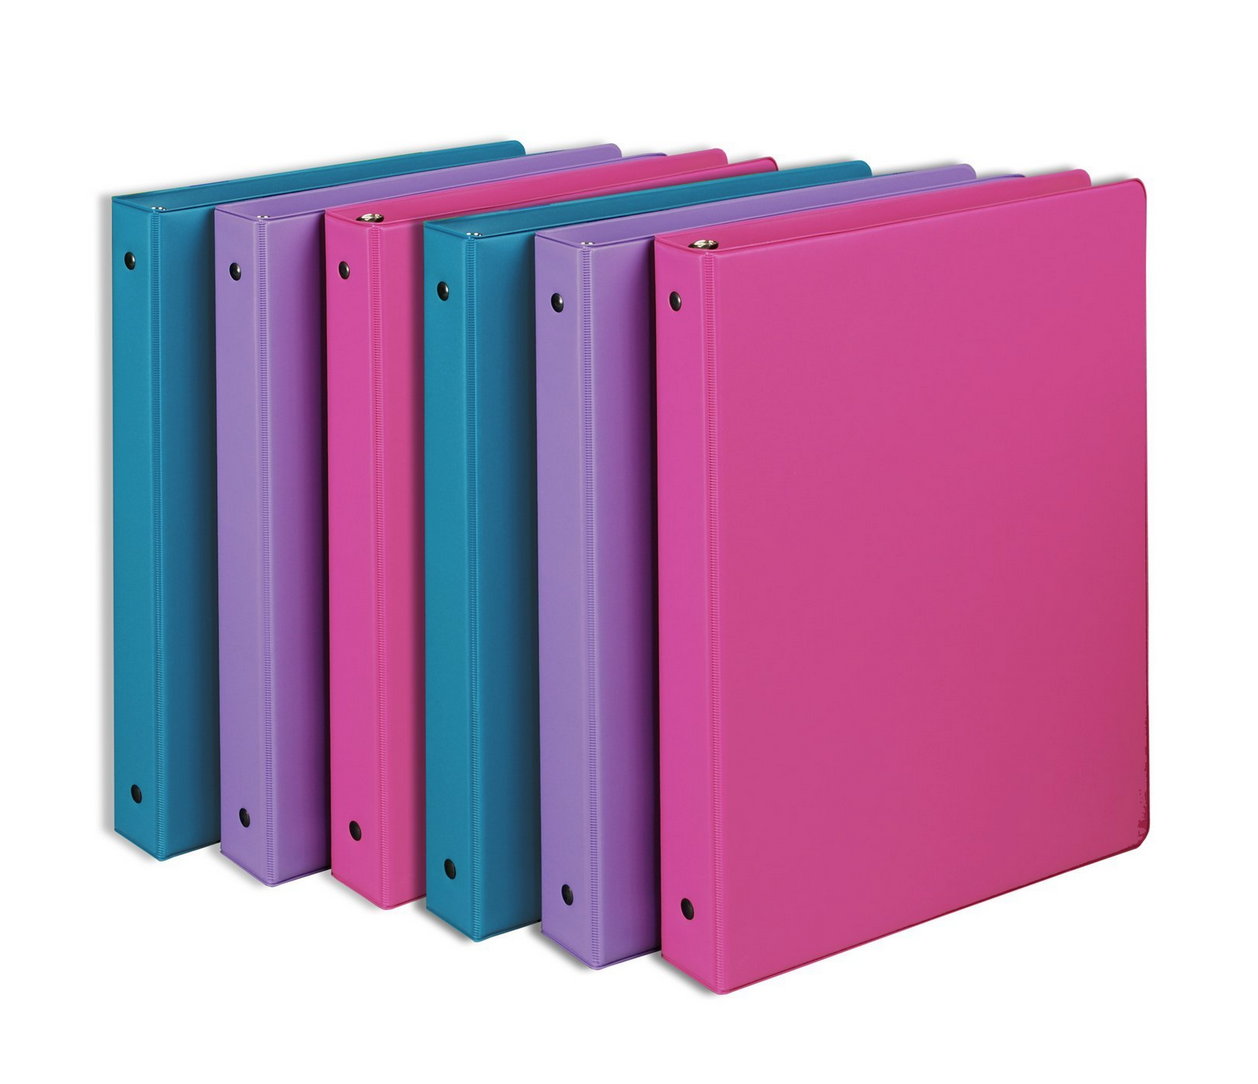 6-Pack of Samsill 1-Inch Round Ring Binders Only $8.22 (Reg. $39.48 ...
